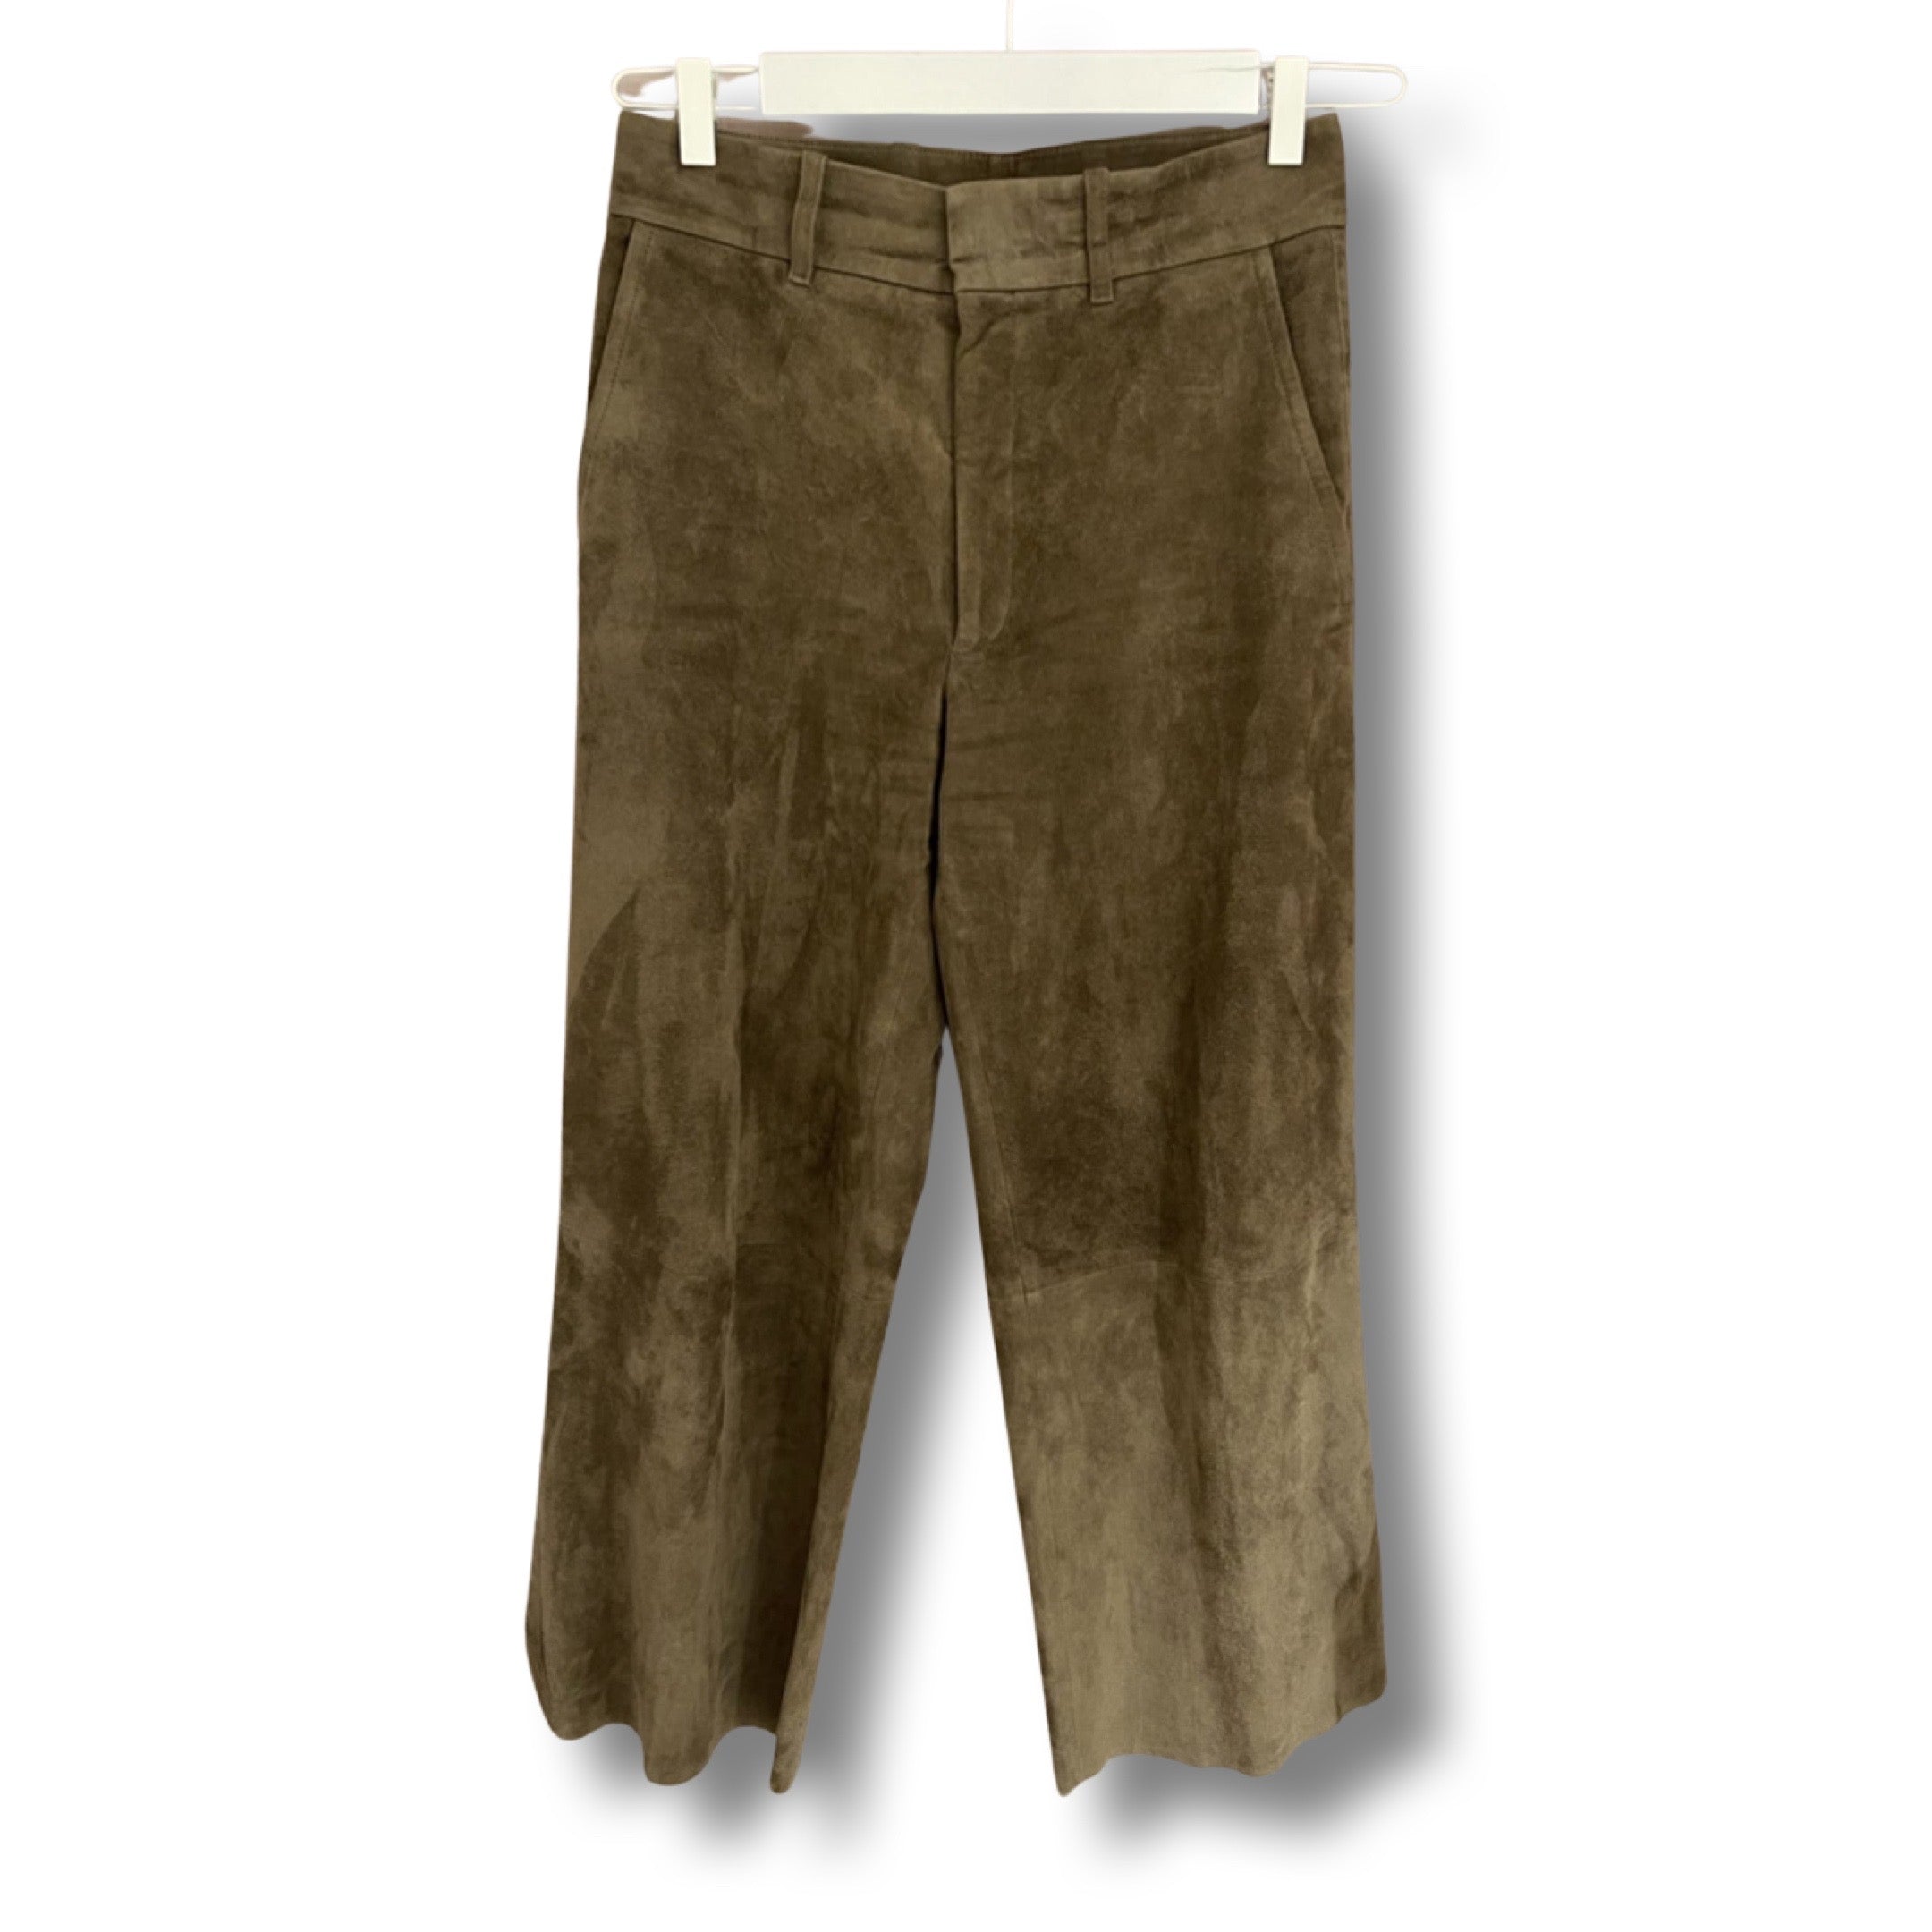 Brown suede culotte by Joseph.